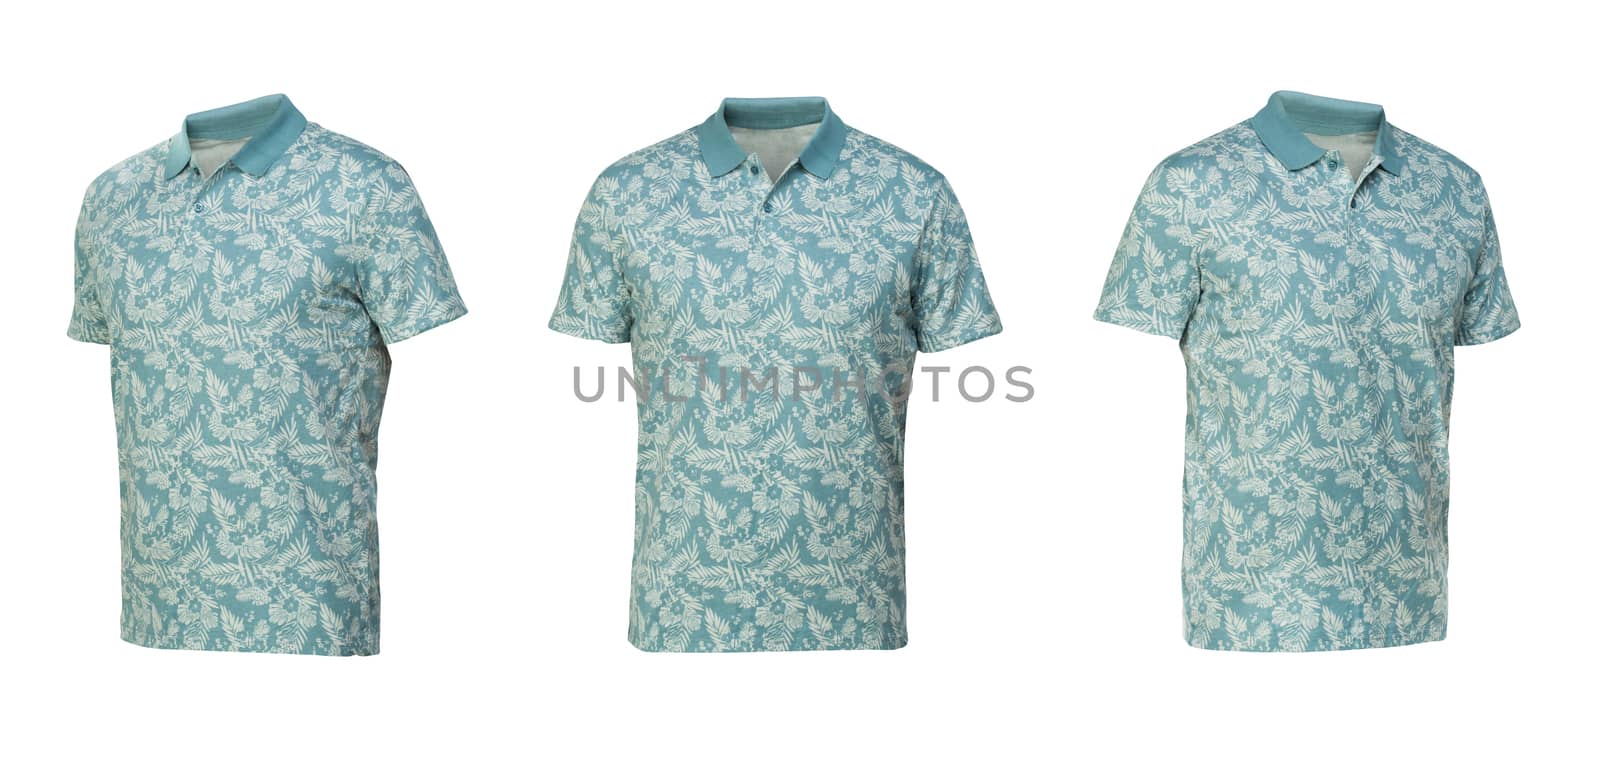 polo shirt with flowers pattern. t-shirt front view three positions on a white background